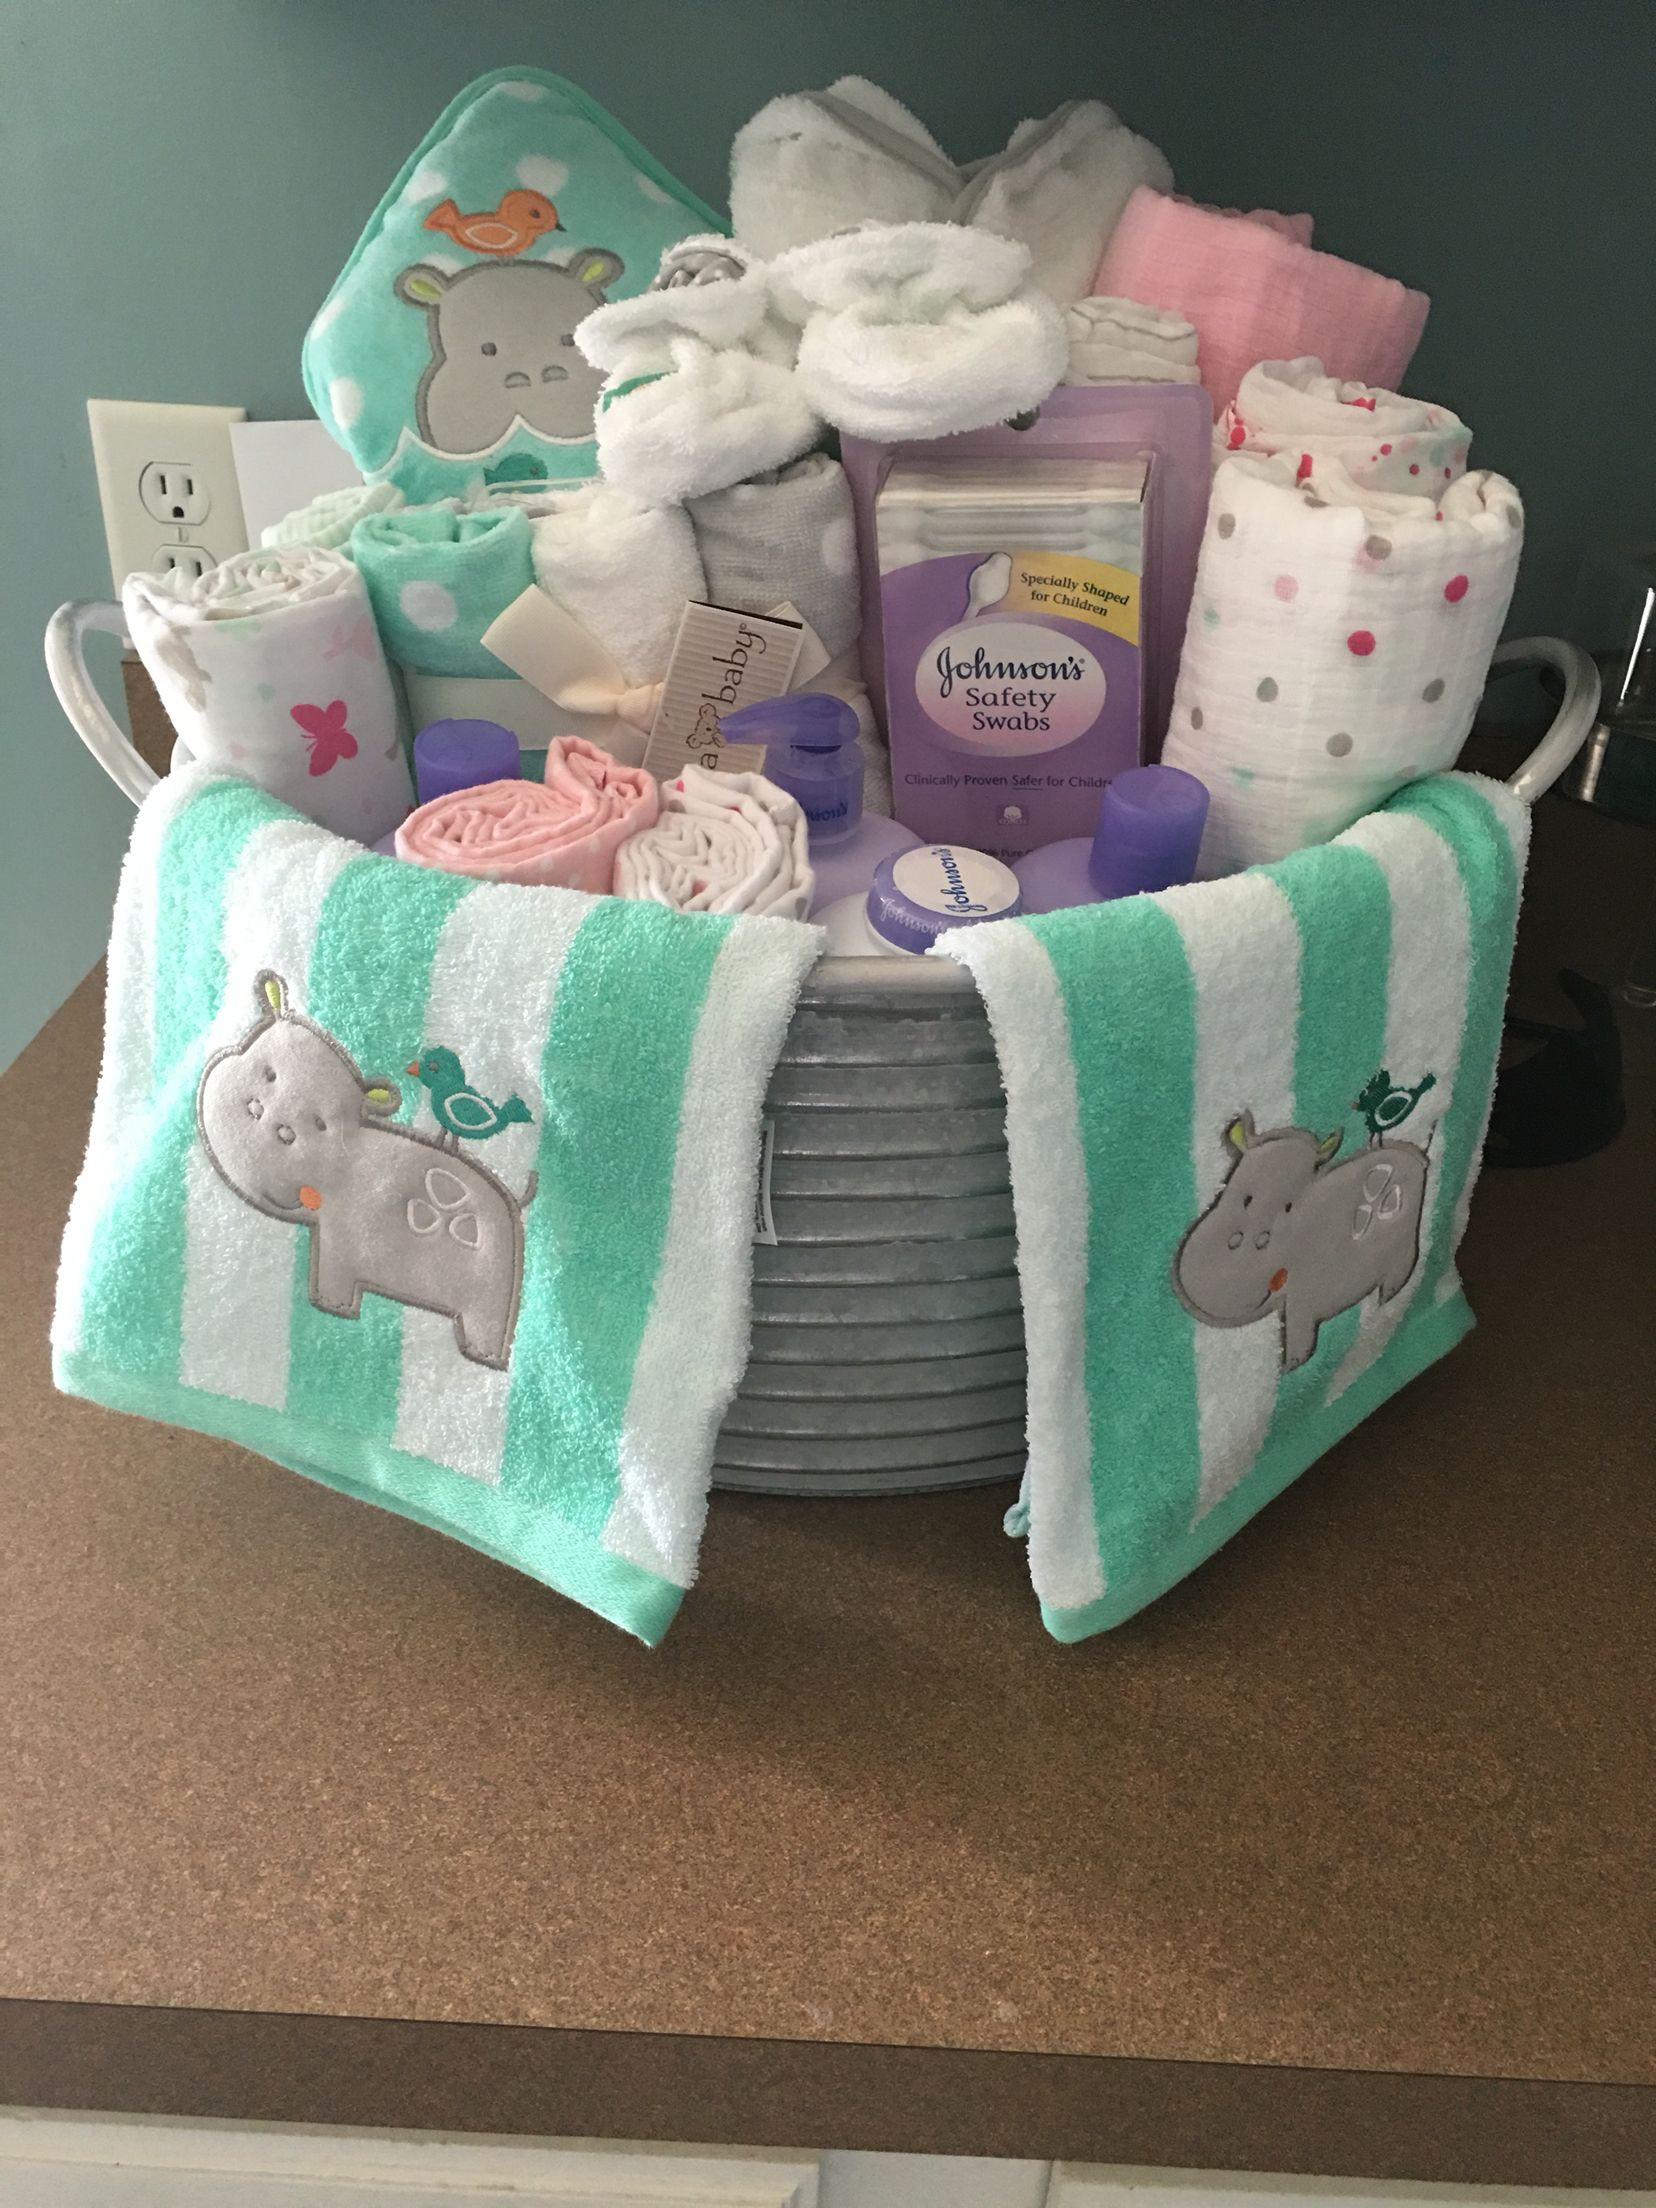 Baby Bath Gift Ideas
 Baby shower present I made Galvanized bucket with baby